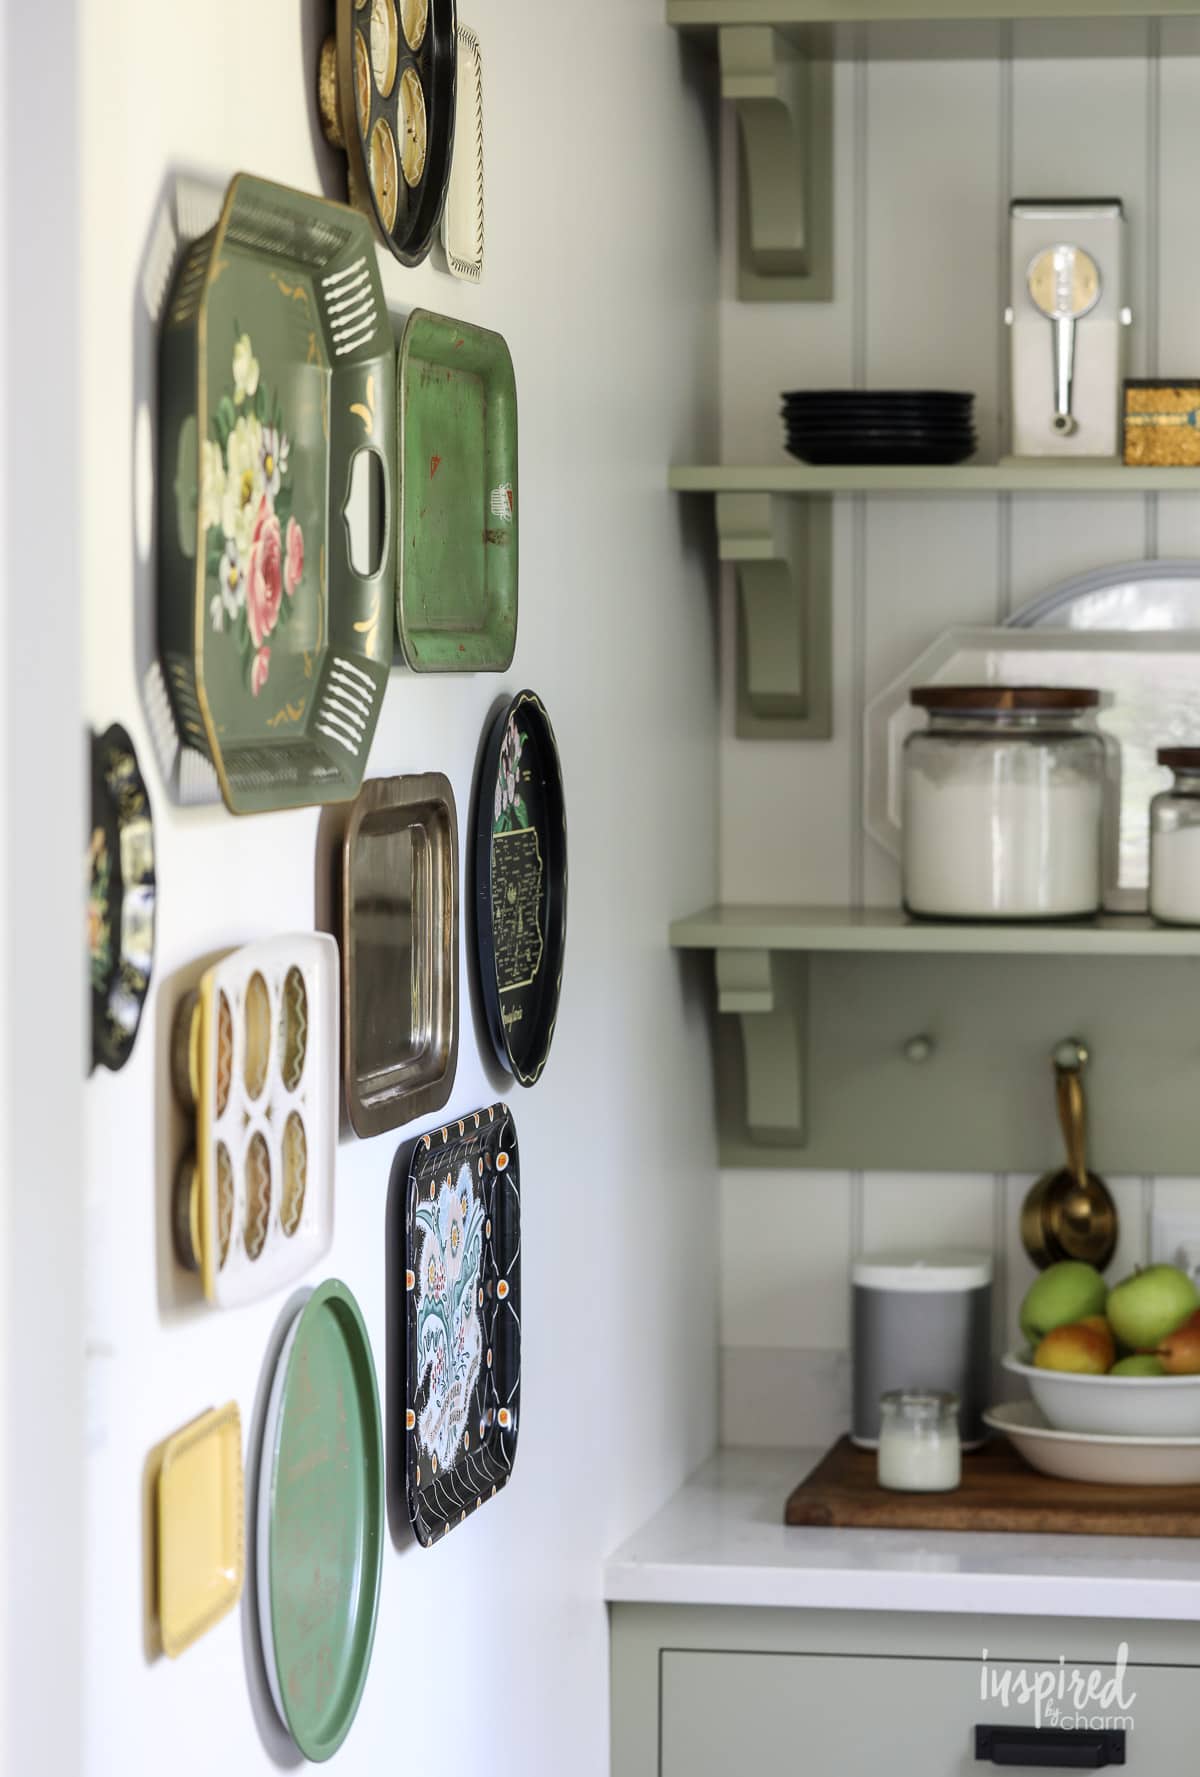 Vintage Metal Tray Gallery Wall in a kitchen.